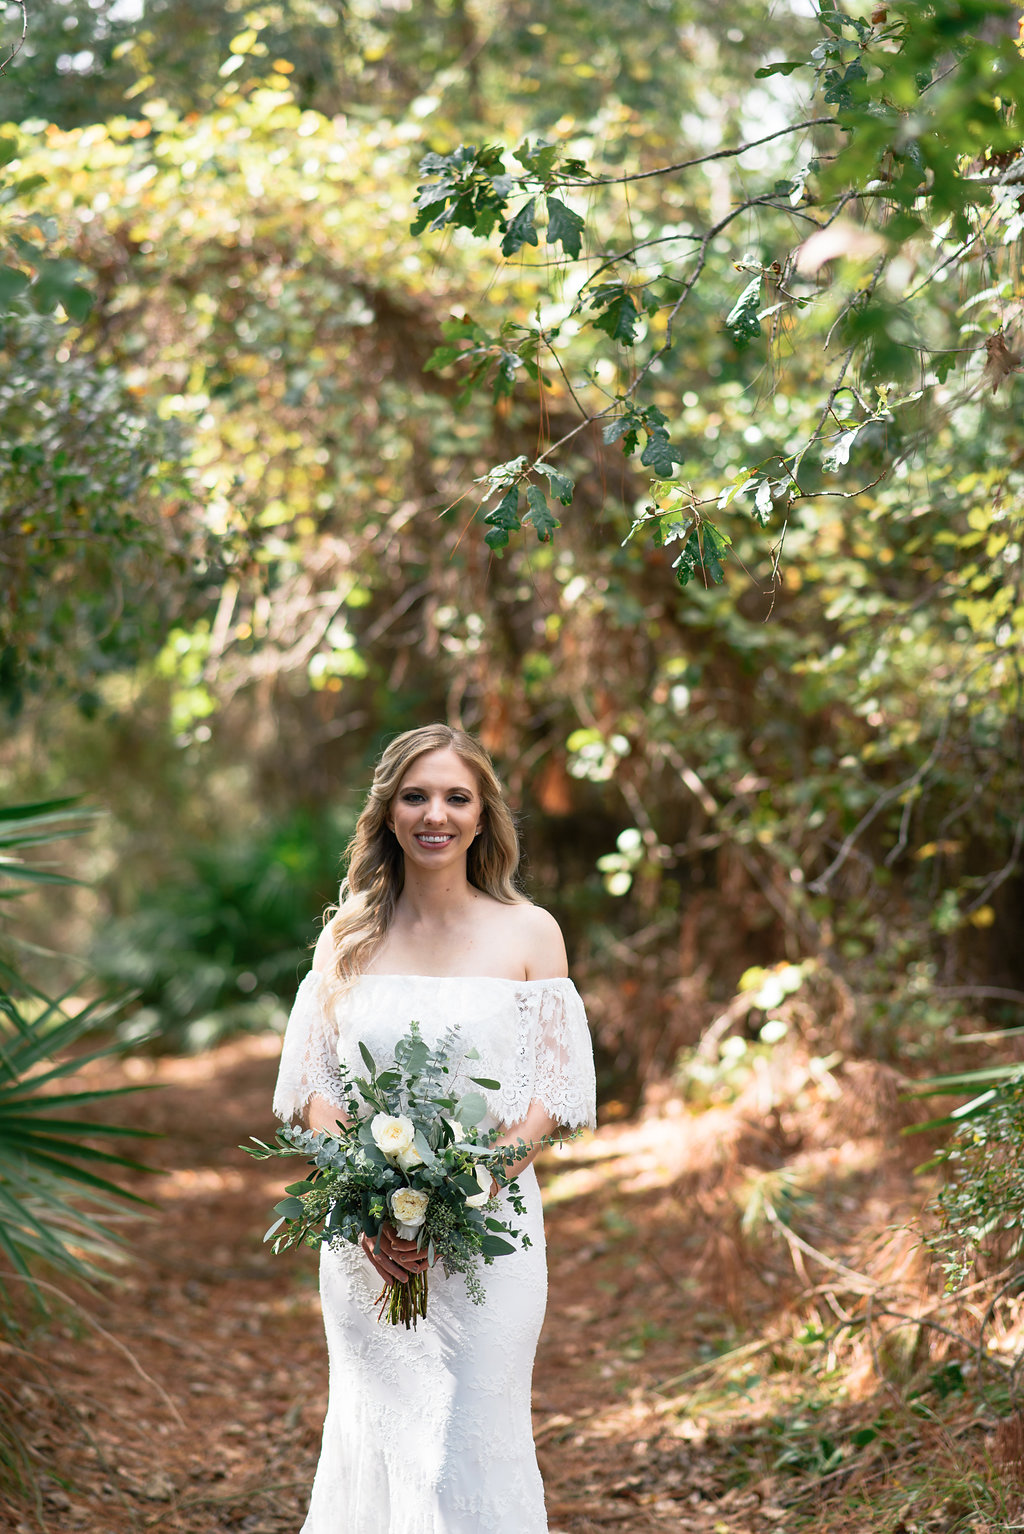 ivory-and-beau-bridal-boutique-meg-hill-photography-laurence-daughters-of-simone-boho-wedding-gown-douglas-ga-wedding-9.jpg